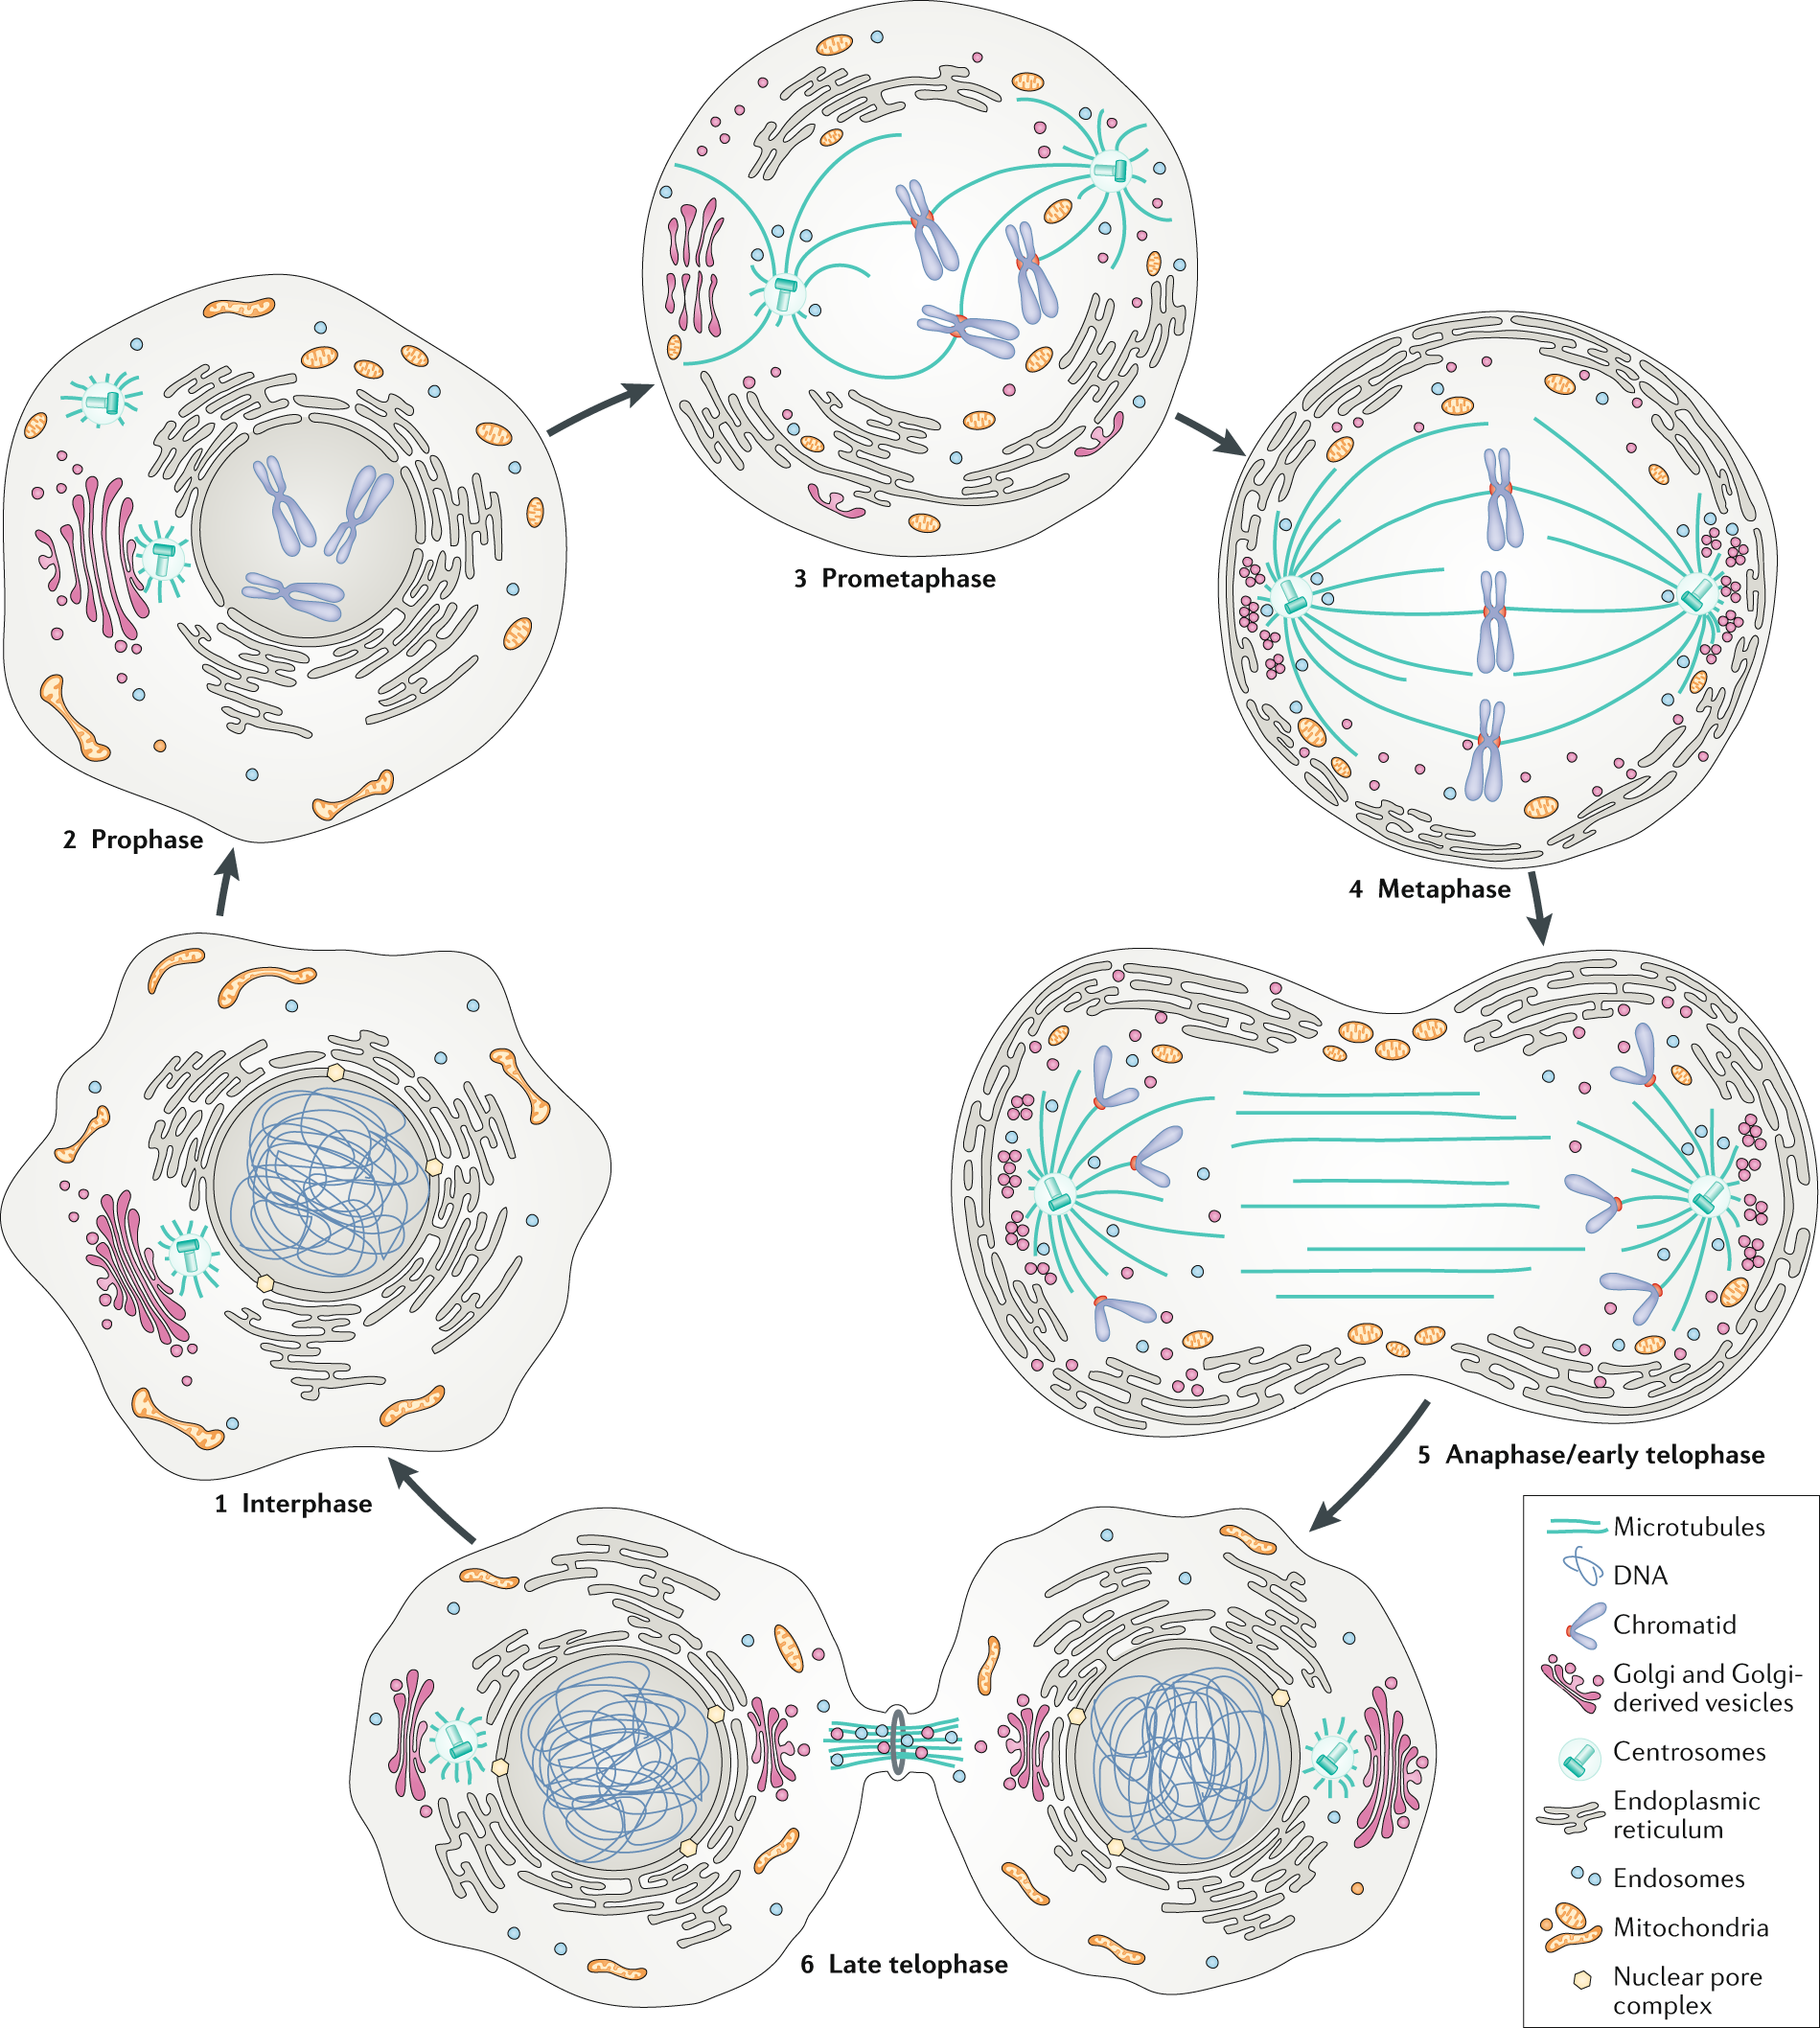 Membrane And Organelle Dynamics During Cell Division Nature Reviews Molecular Cell Biology